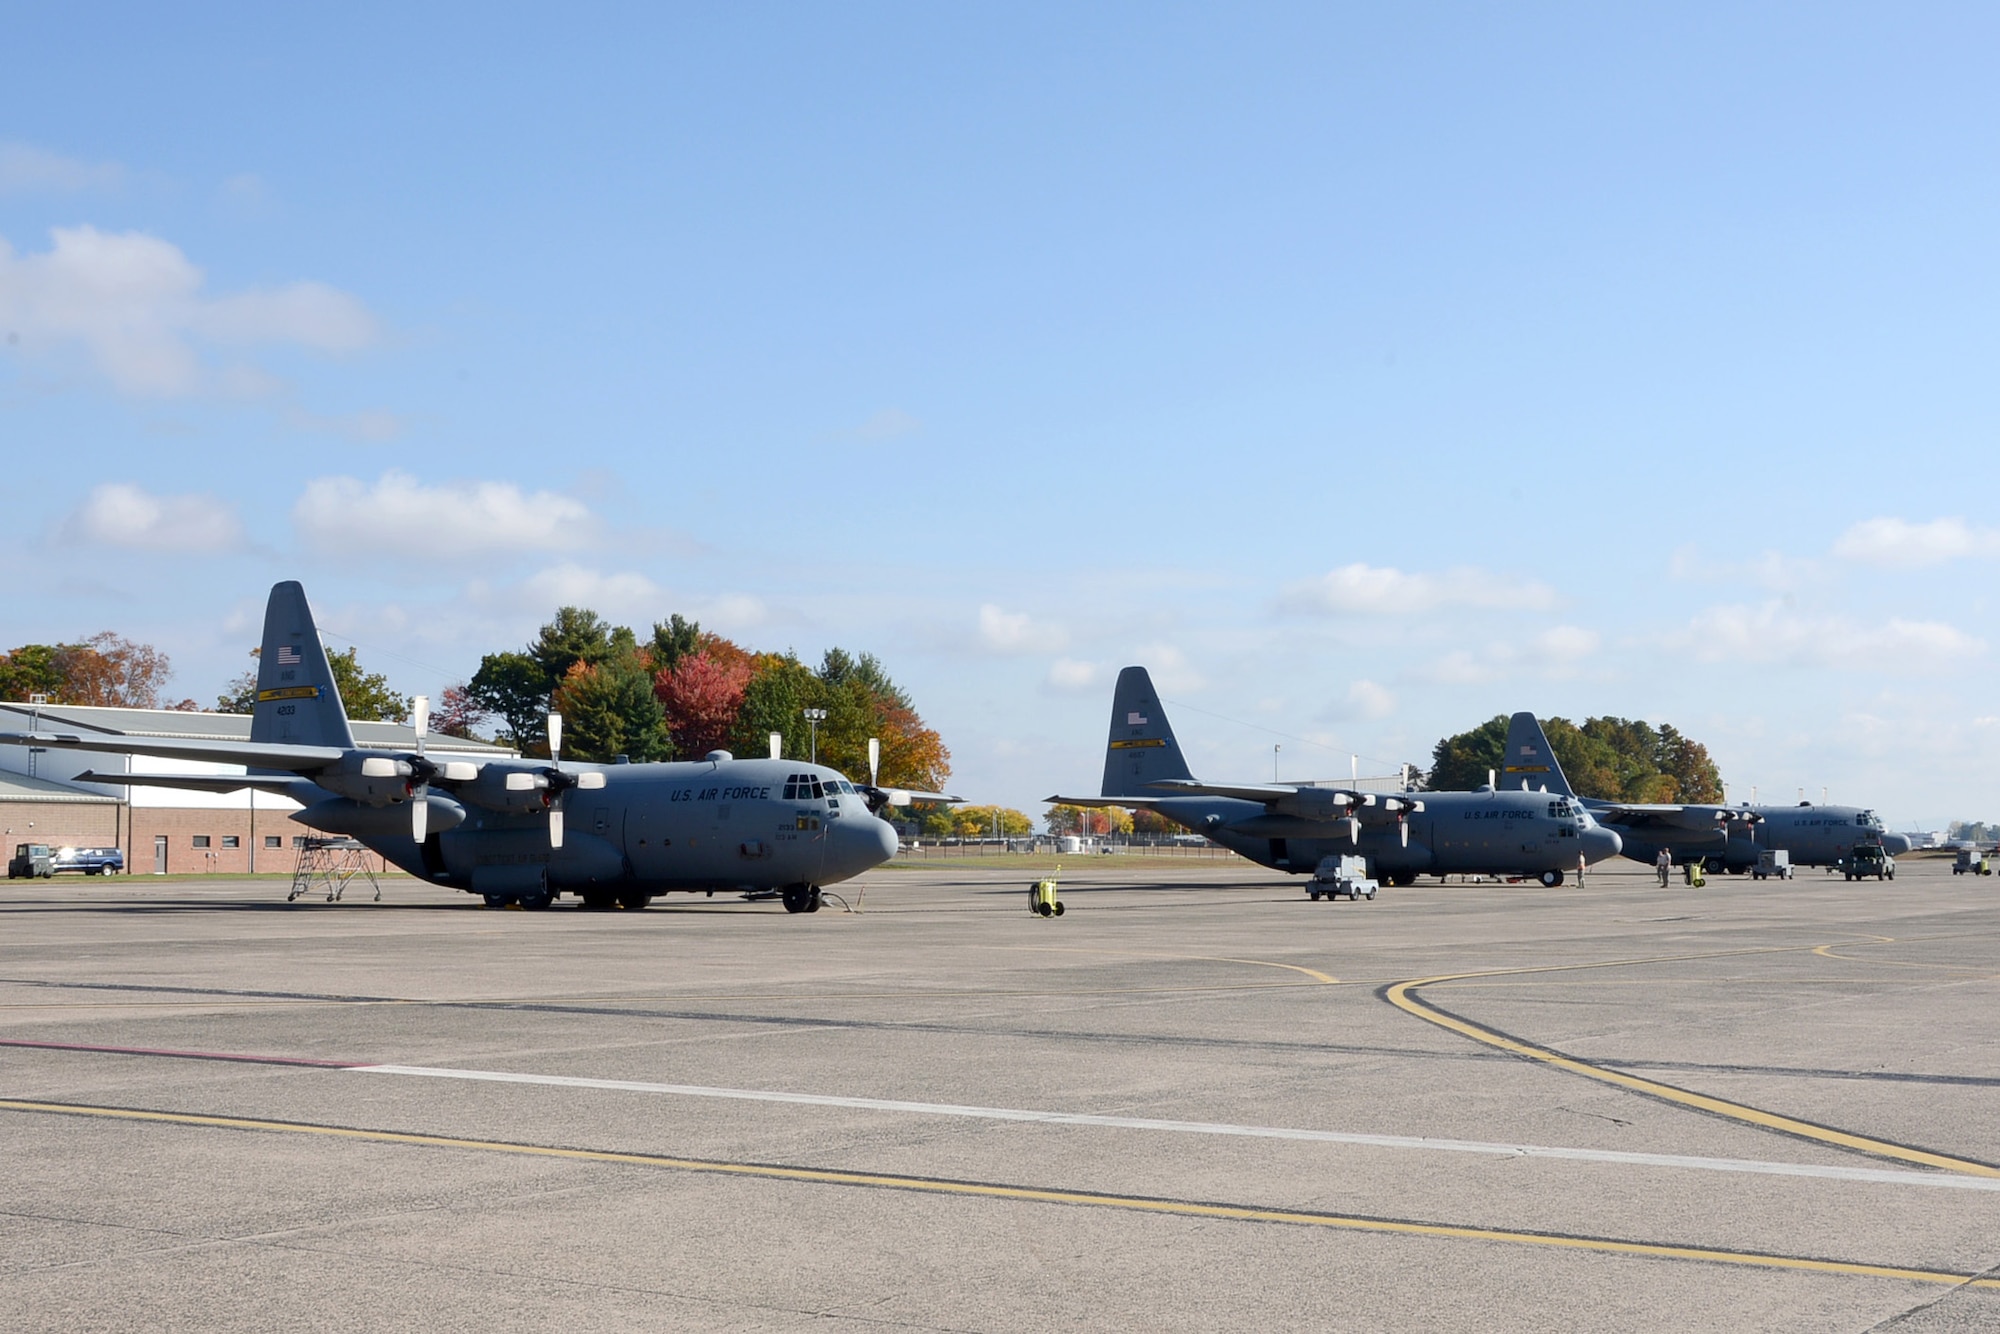 One year after the arrival of the first C-130H Hercules at Bradley Air National Guard Base in East Granby, Conn., a full fleet of aircraft adds color to the fall flight line Friday, October 17, 2014.  The Flying Yankees' acceptance of the final of eight aircraft assigned to the 103rd Airlift Wing Wednesday, October 15, 20104, marks an important milestone in the unit's conversion to the C-130 mission.  (U.S. Air National Guard photo by Master Sgt Erin McNamara)